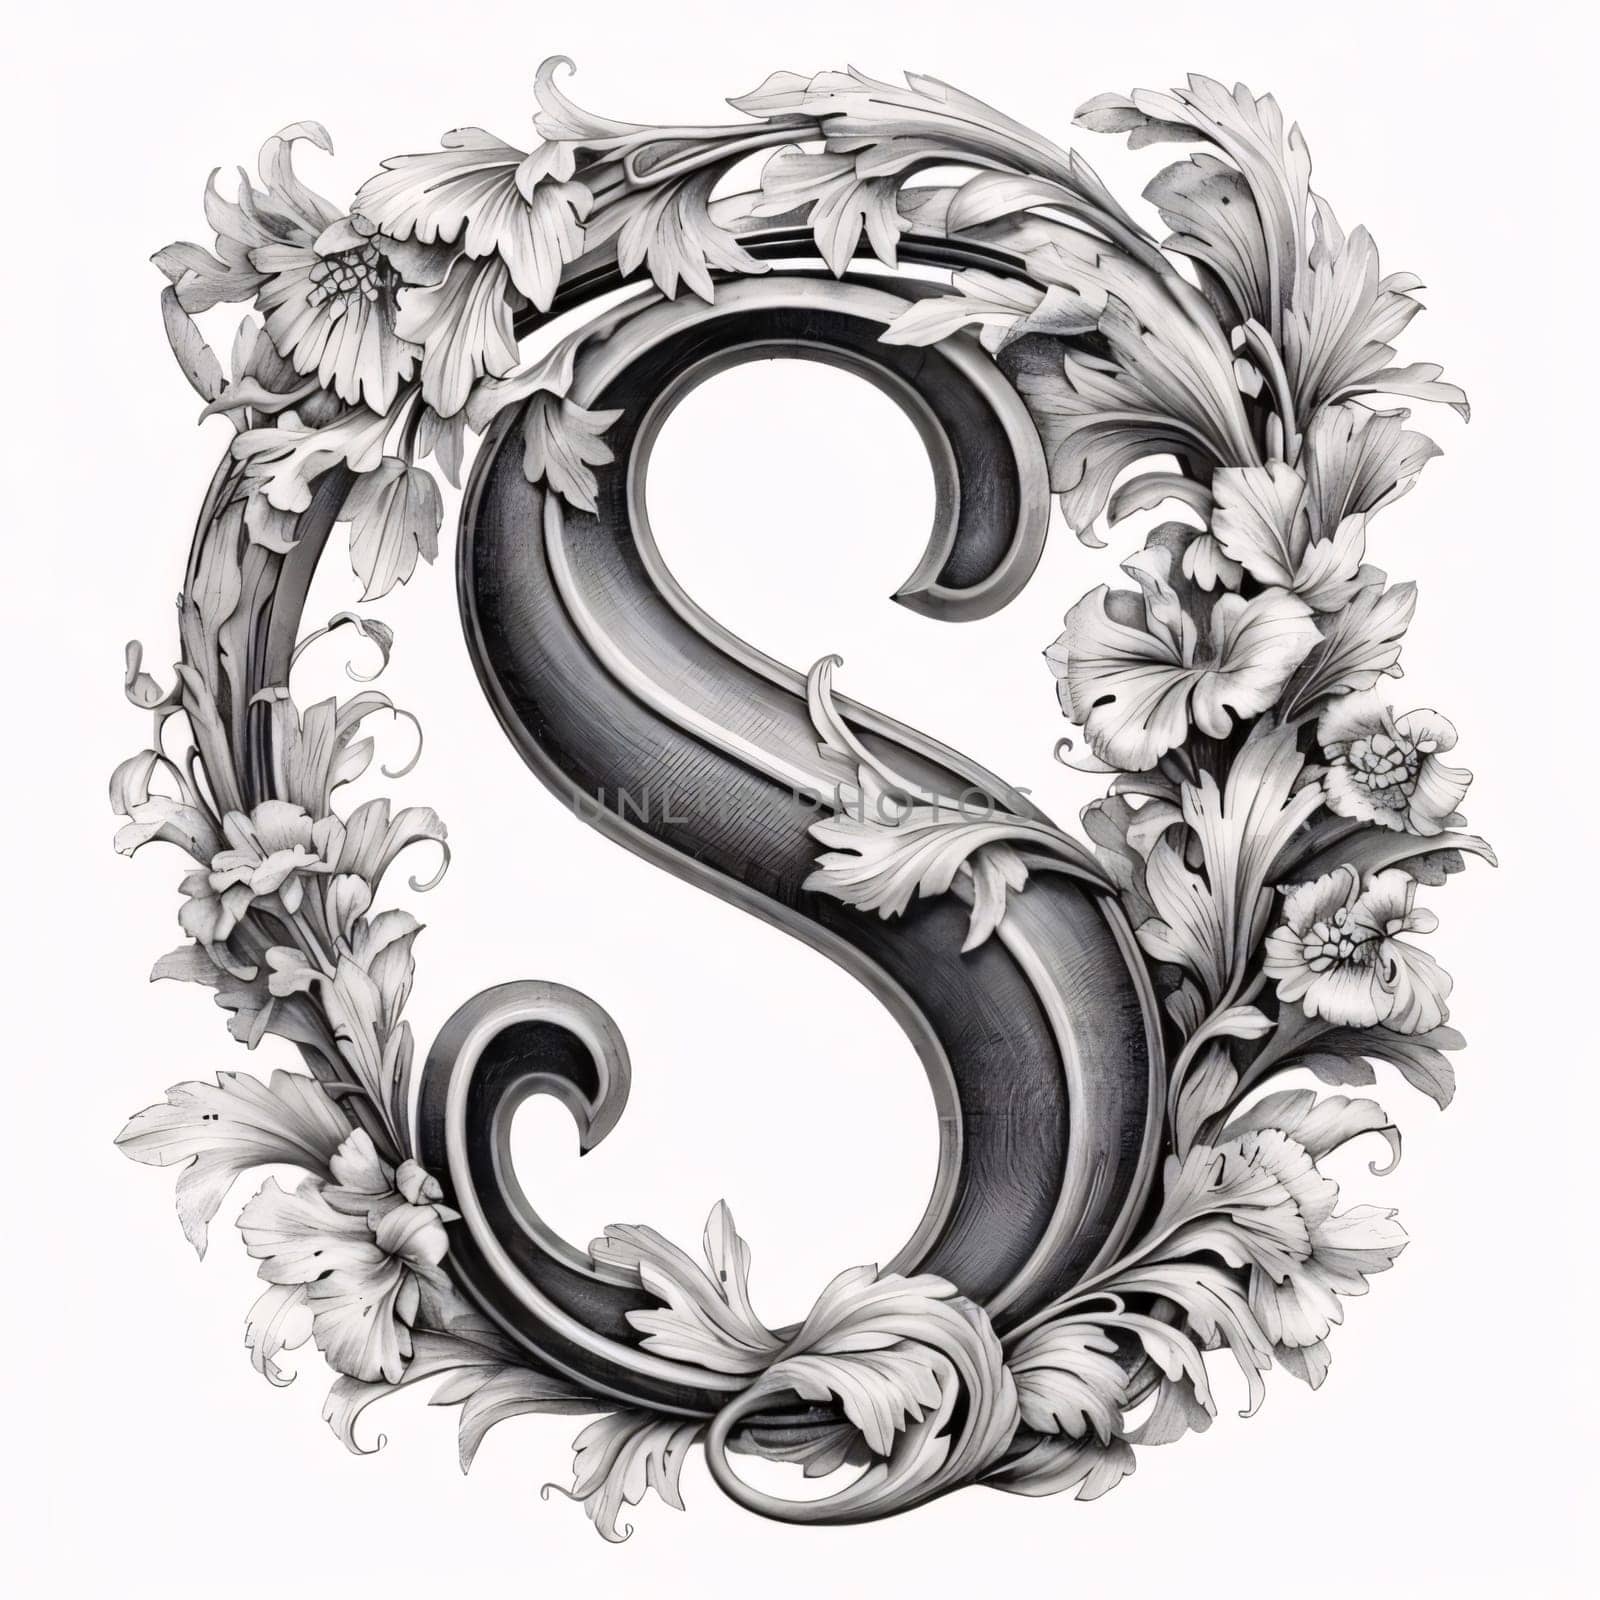 Elegant capital letter S with floral ornament. Hand-drawn illustration. by ThemesS